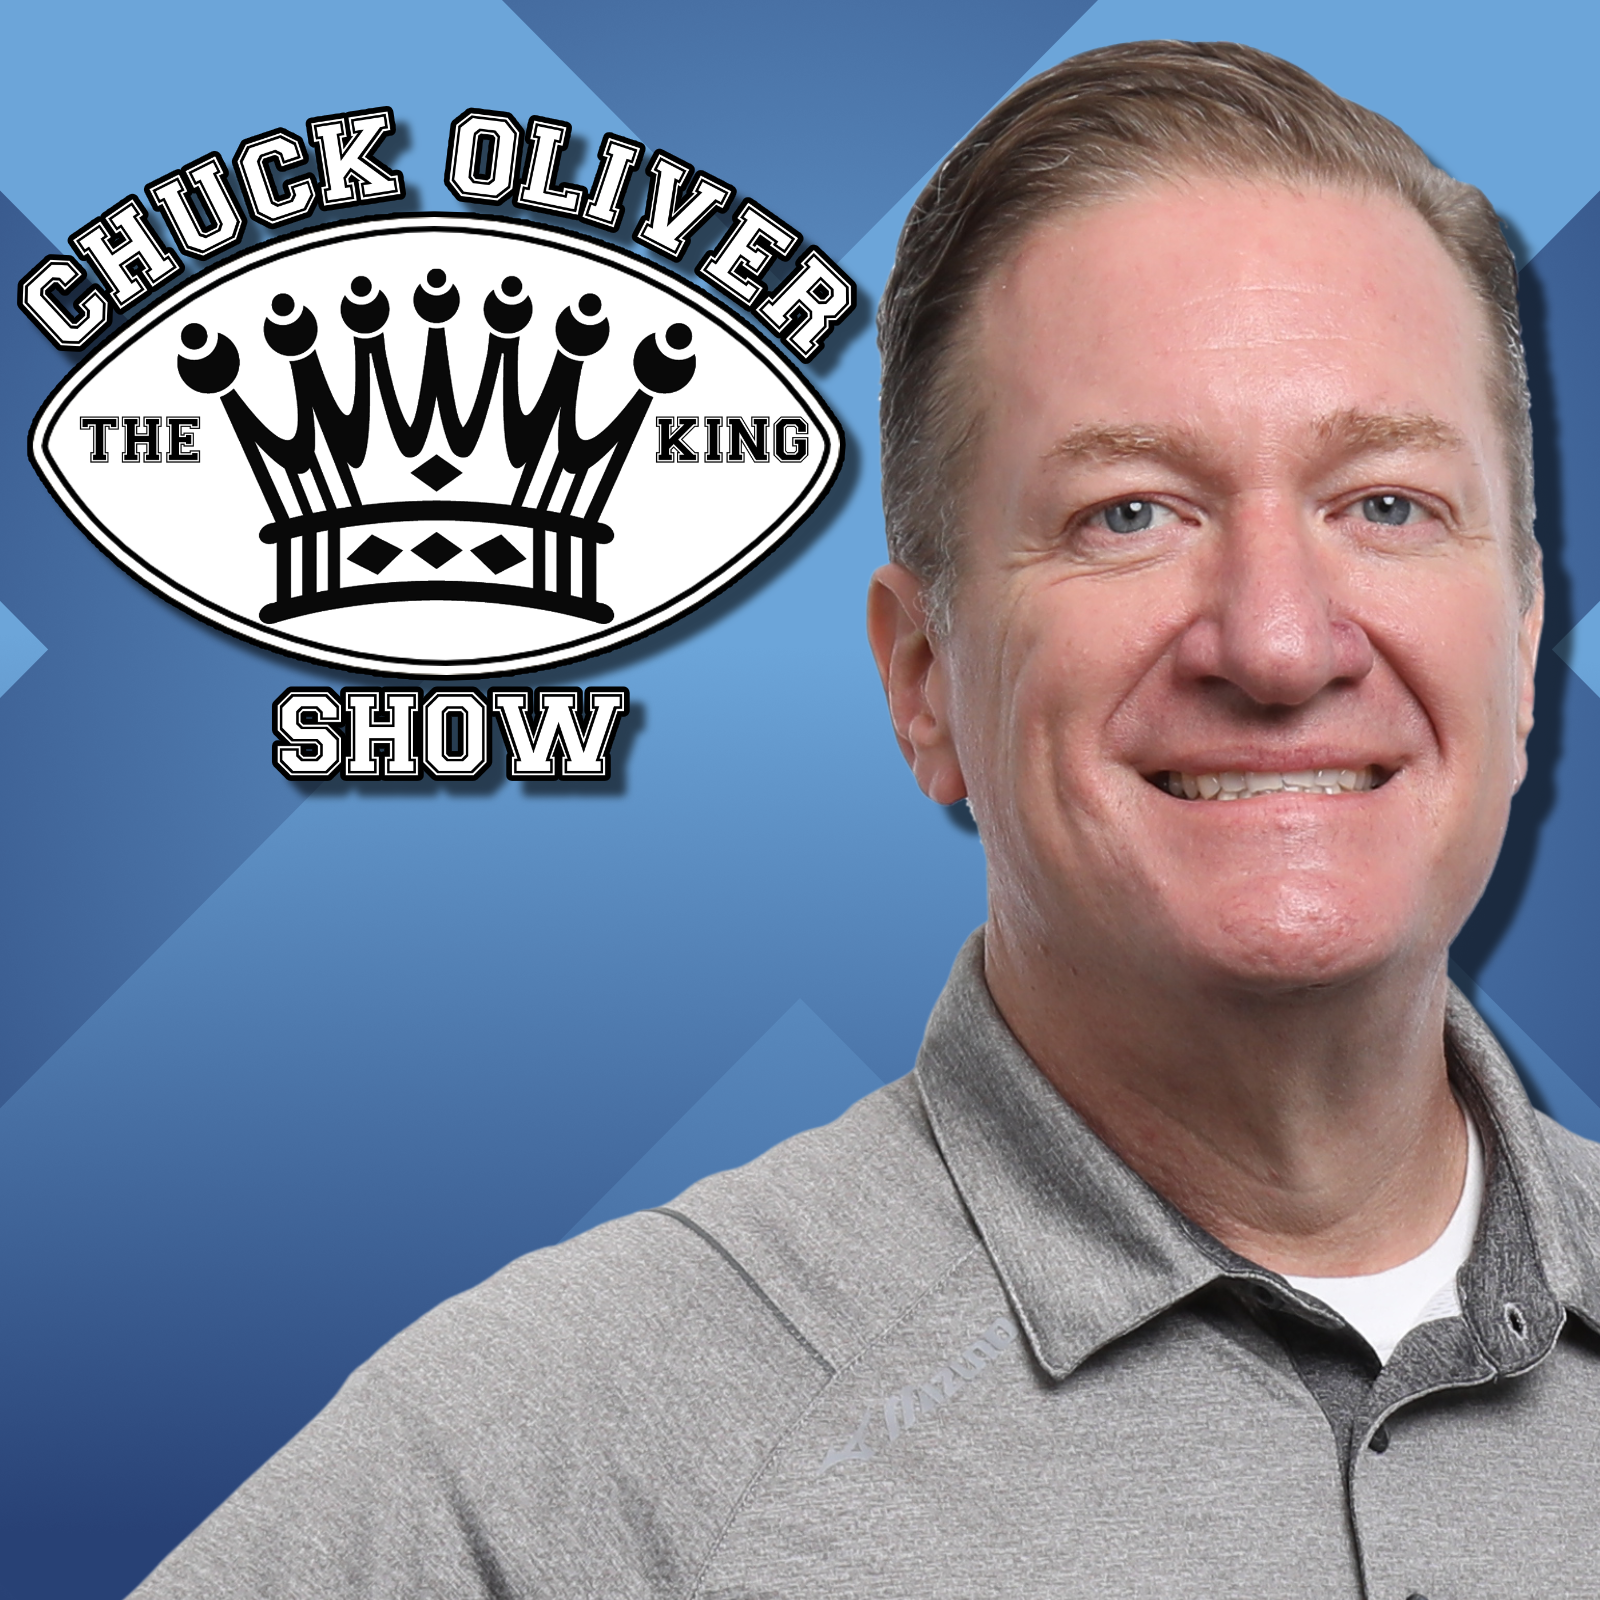 CHUCK OLIVER SHOW 2-23 FRIDAY HOUR 1